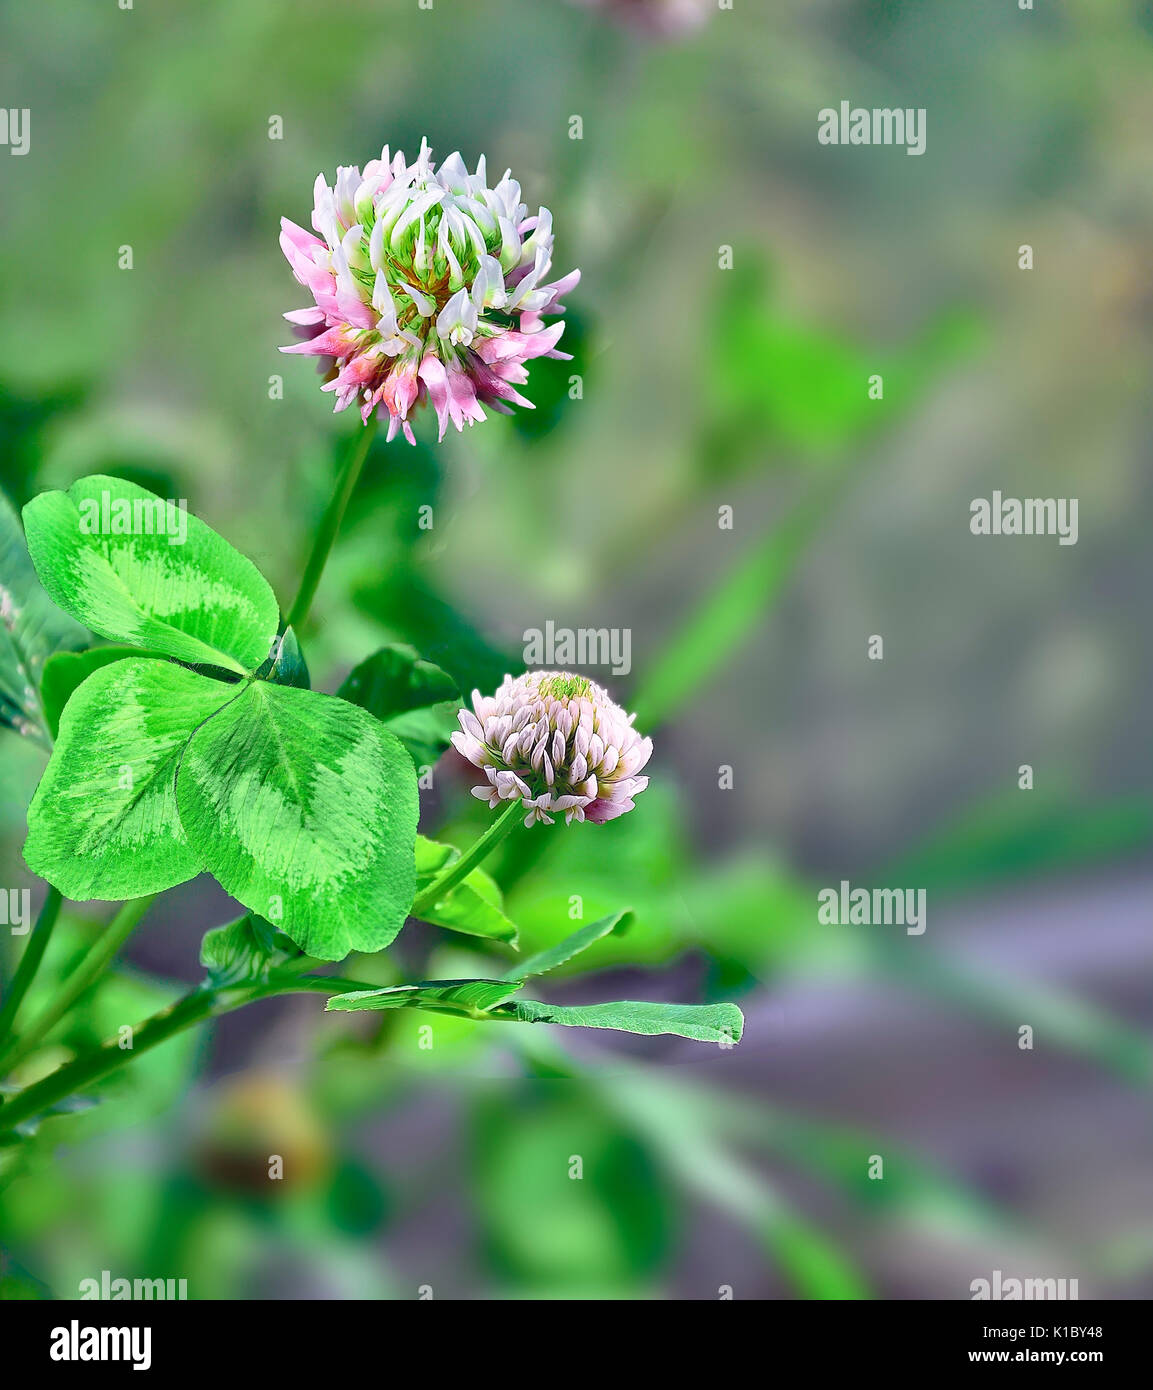 Flowers and leaves of pink clover (Trifolium). Honey and medicinal plant. Stock Photo